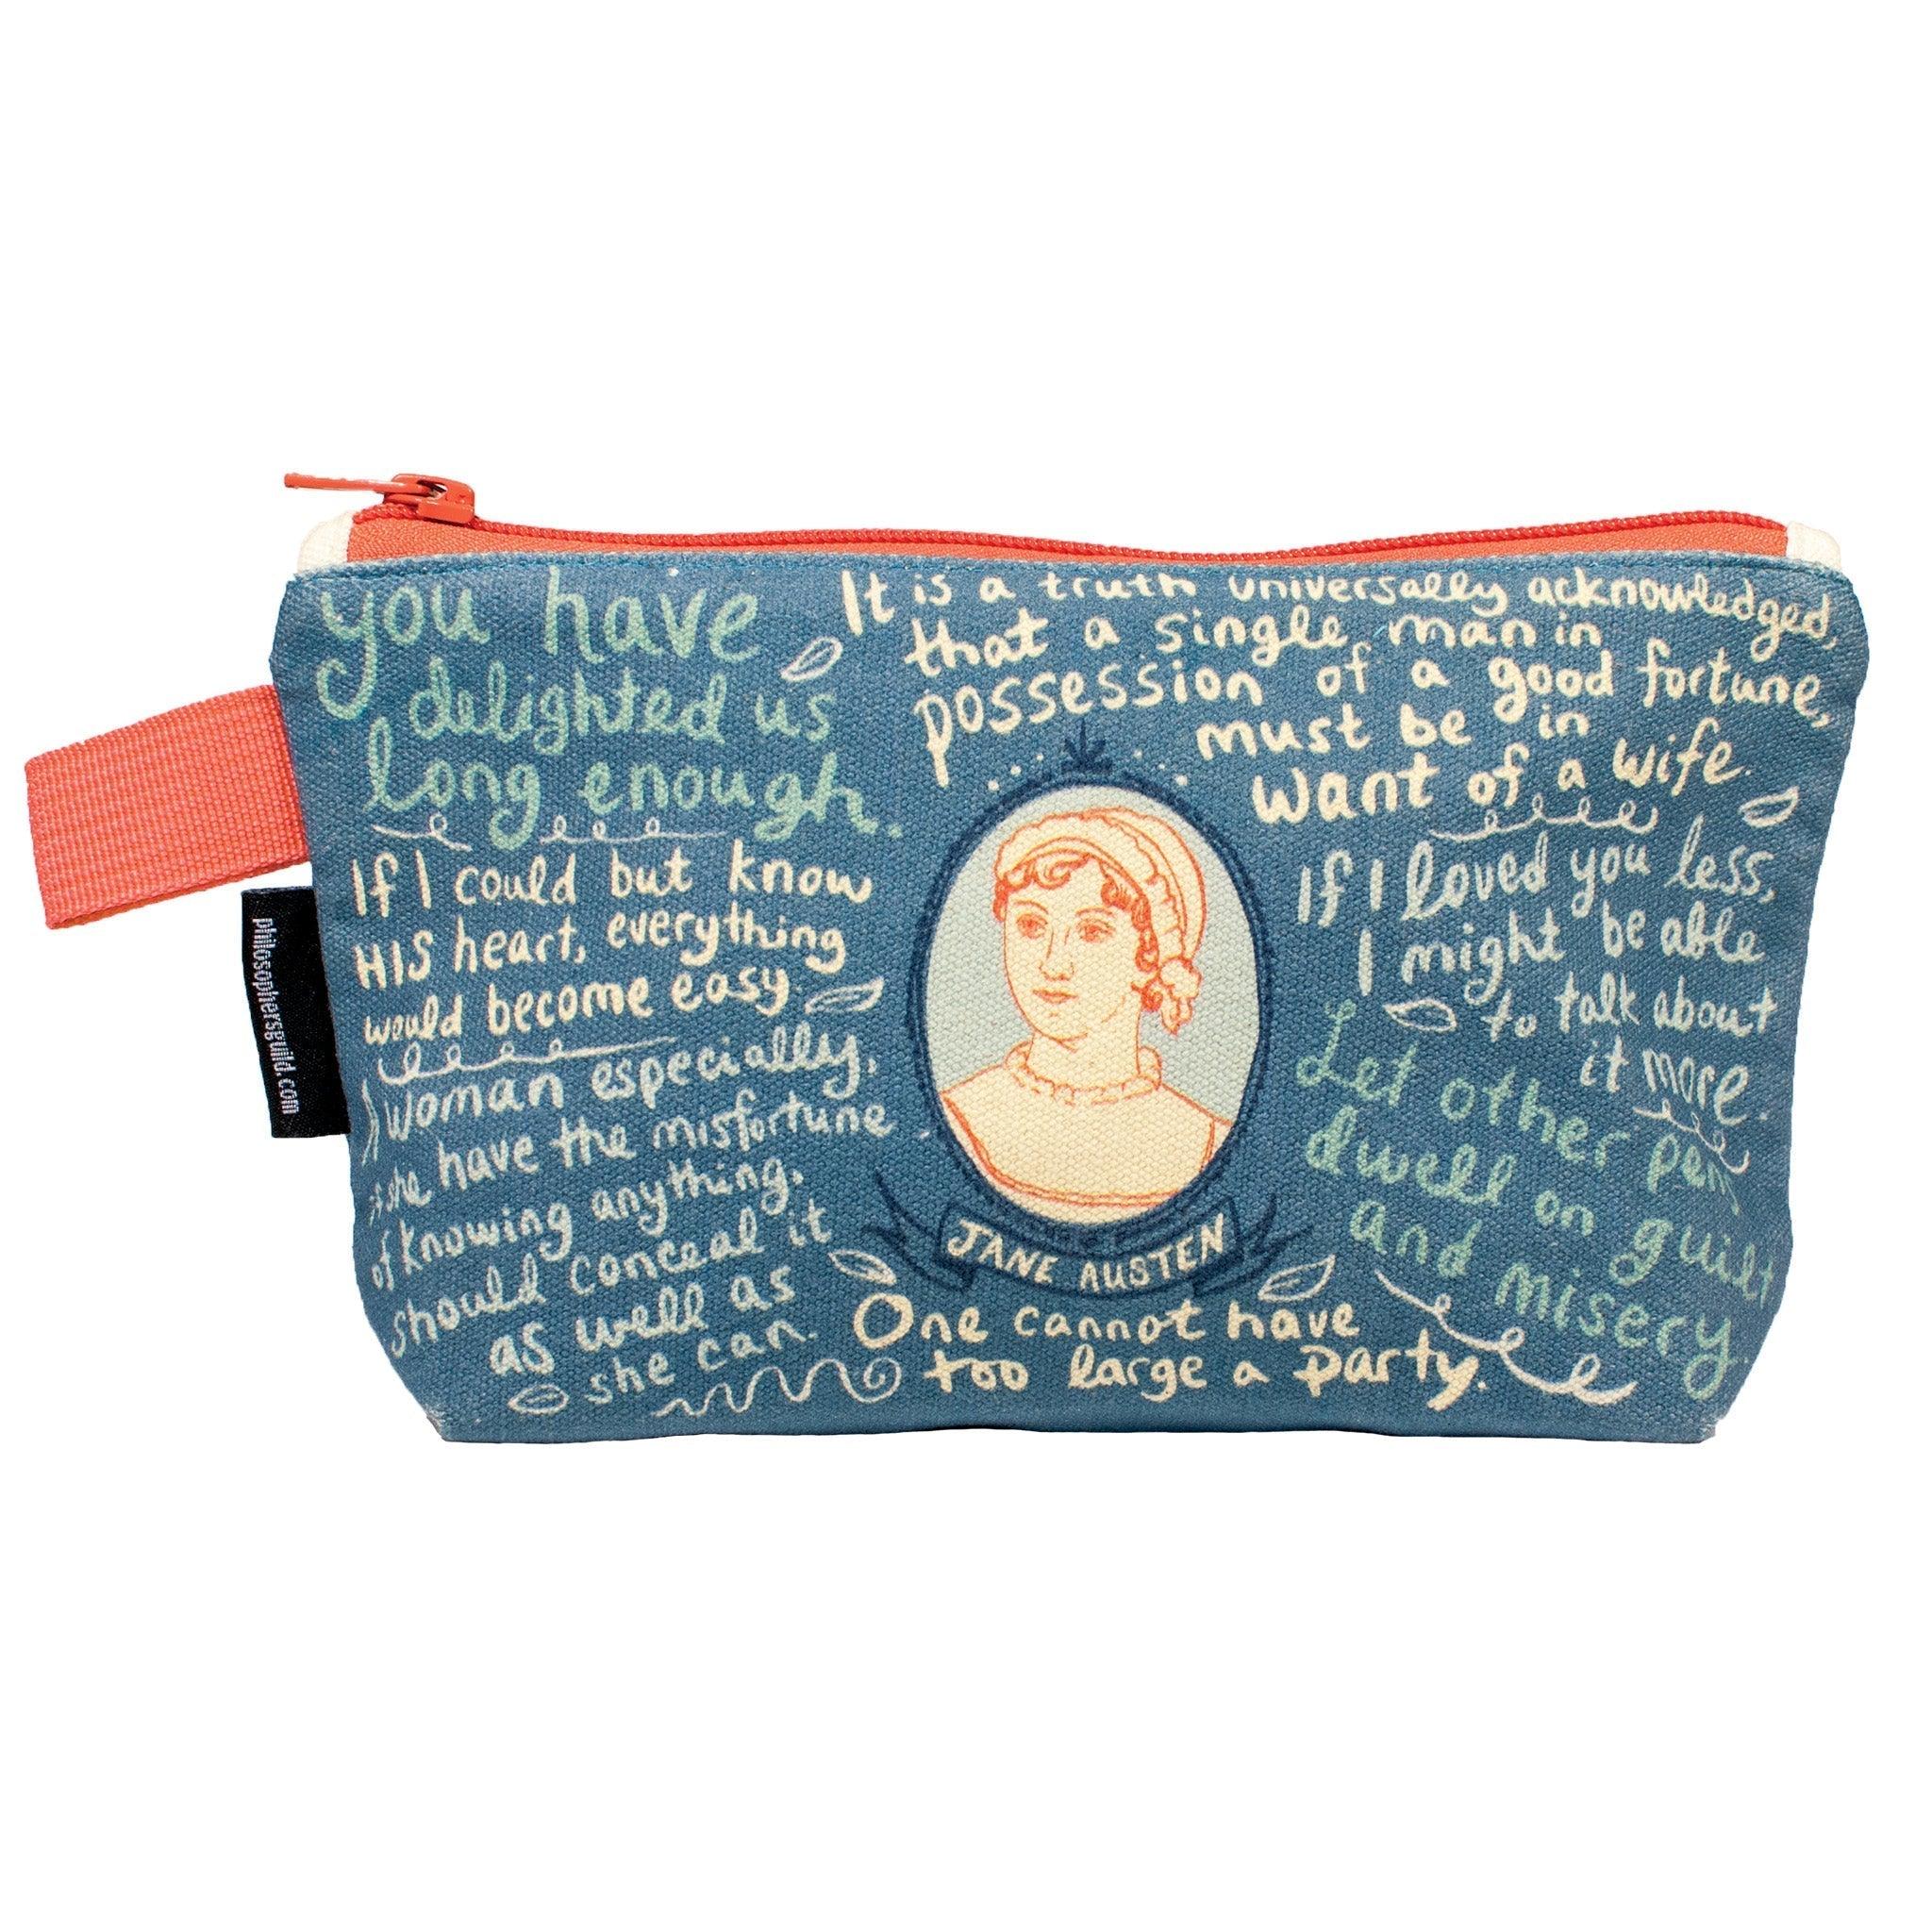 Product photo of Jane Austen Quotes Zipper Bag, a novelty gift manufactured by The Unemployed Philosophers Guild.